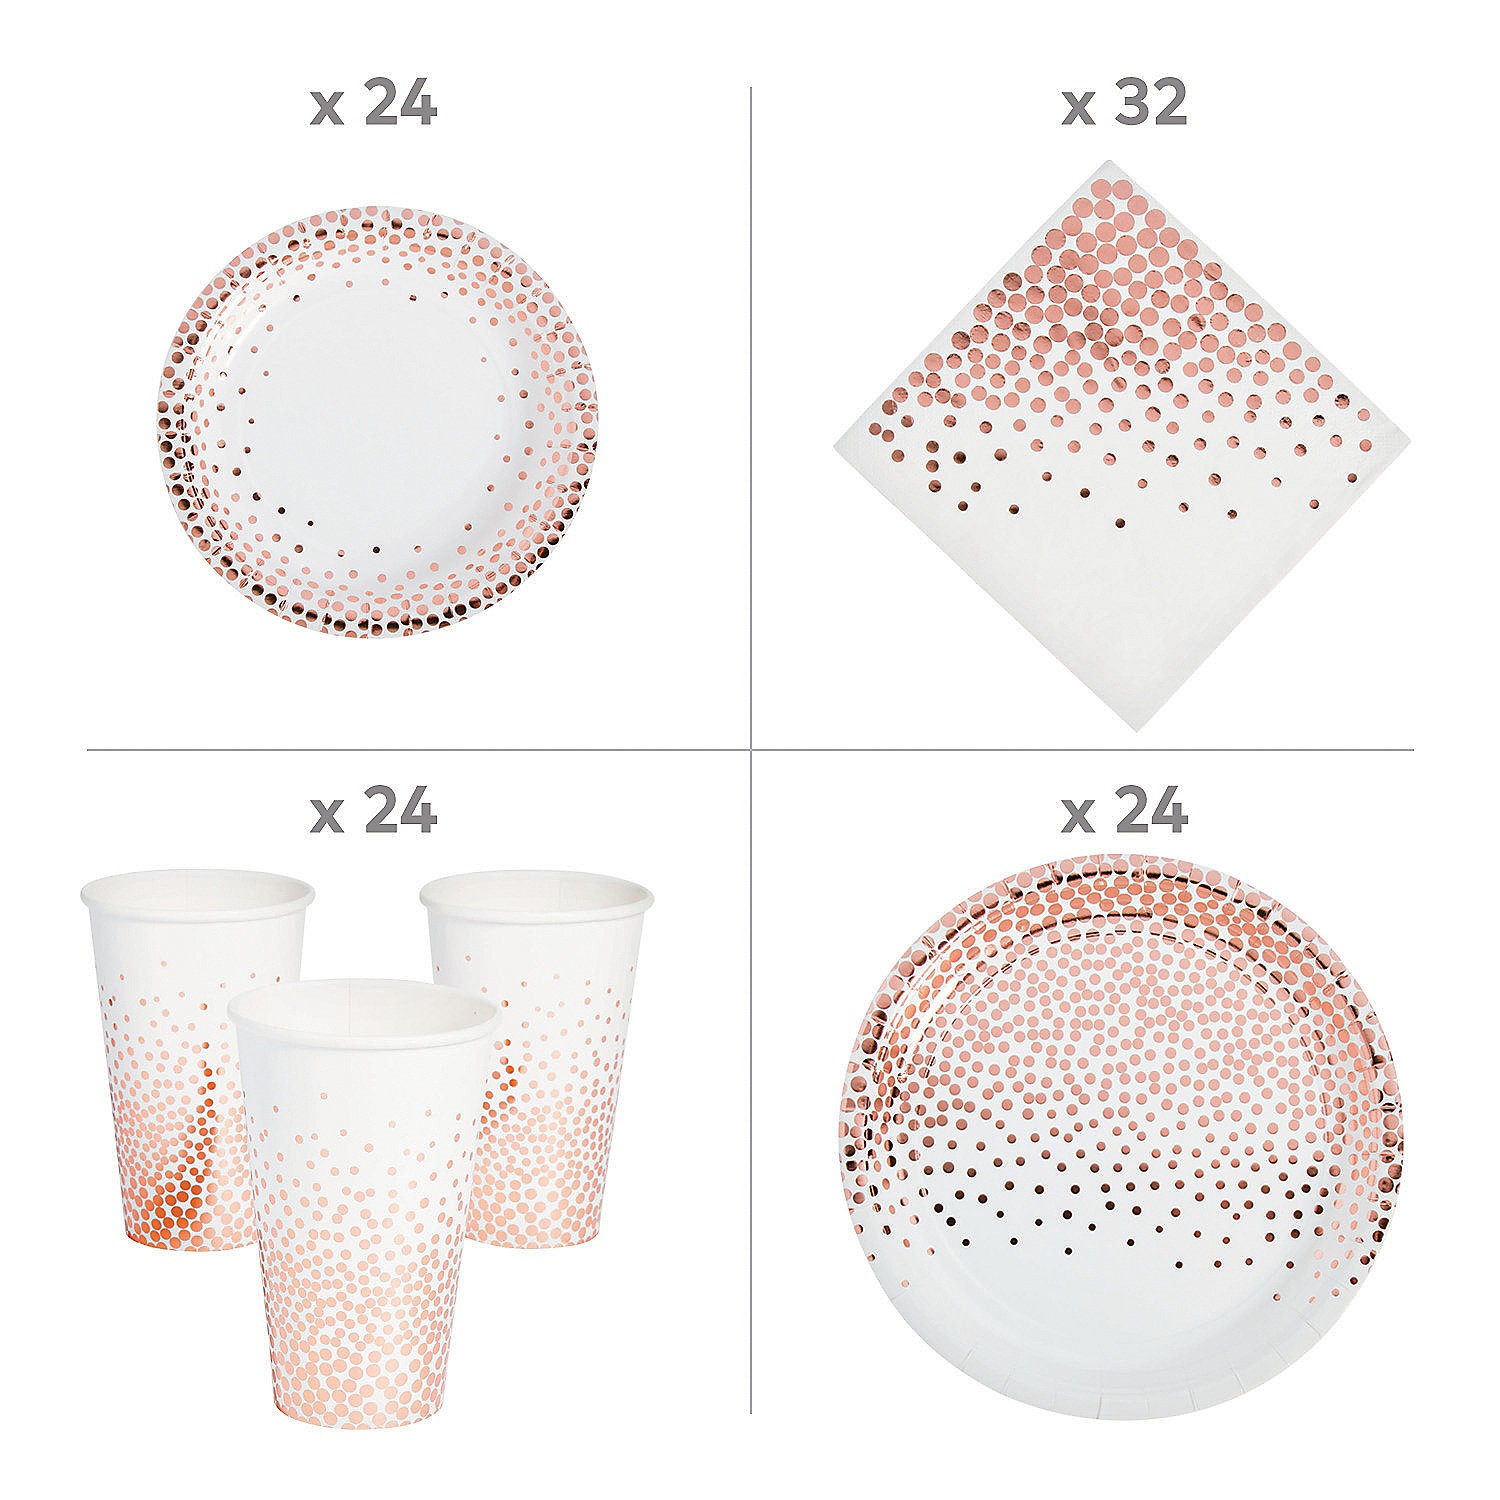 rose-gold-dot-tableware-kit-for-24-guests_13979088-a01